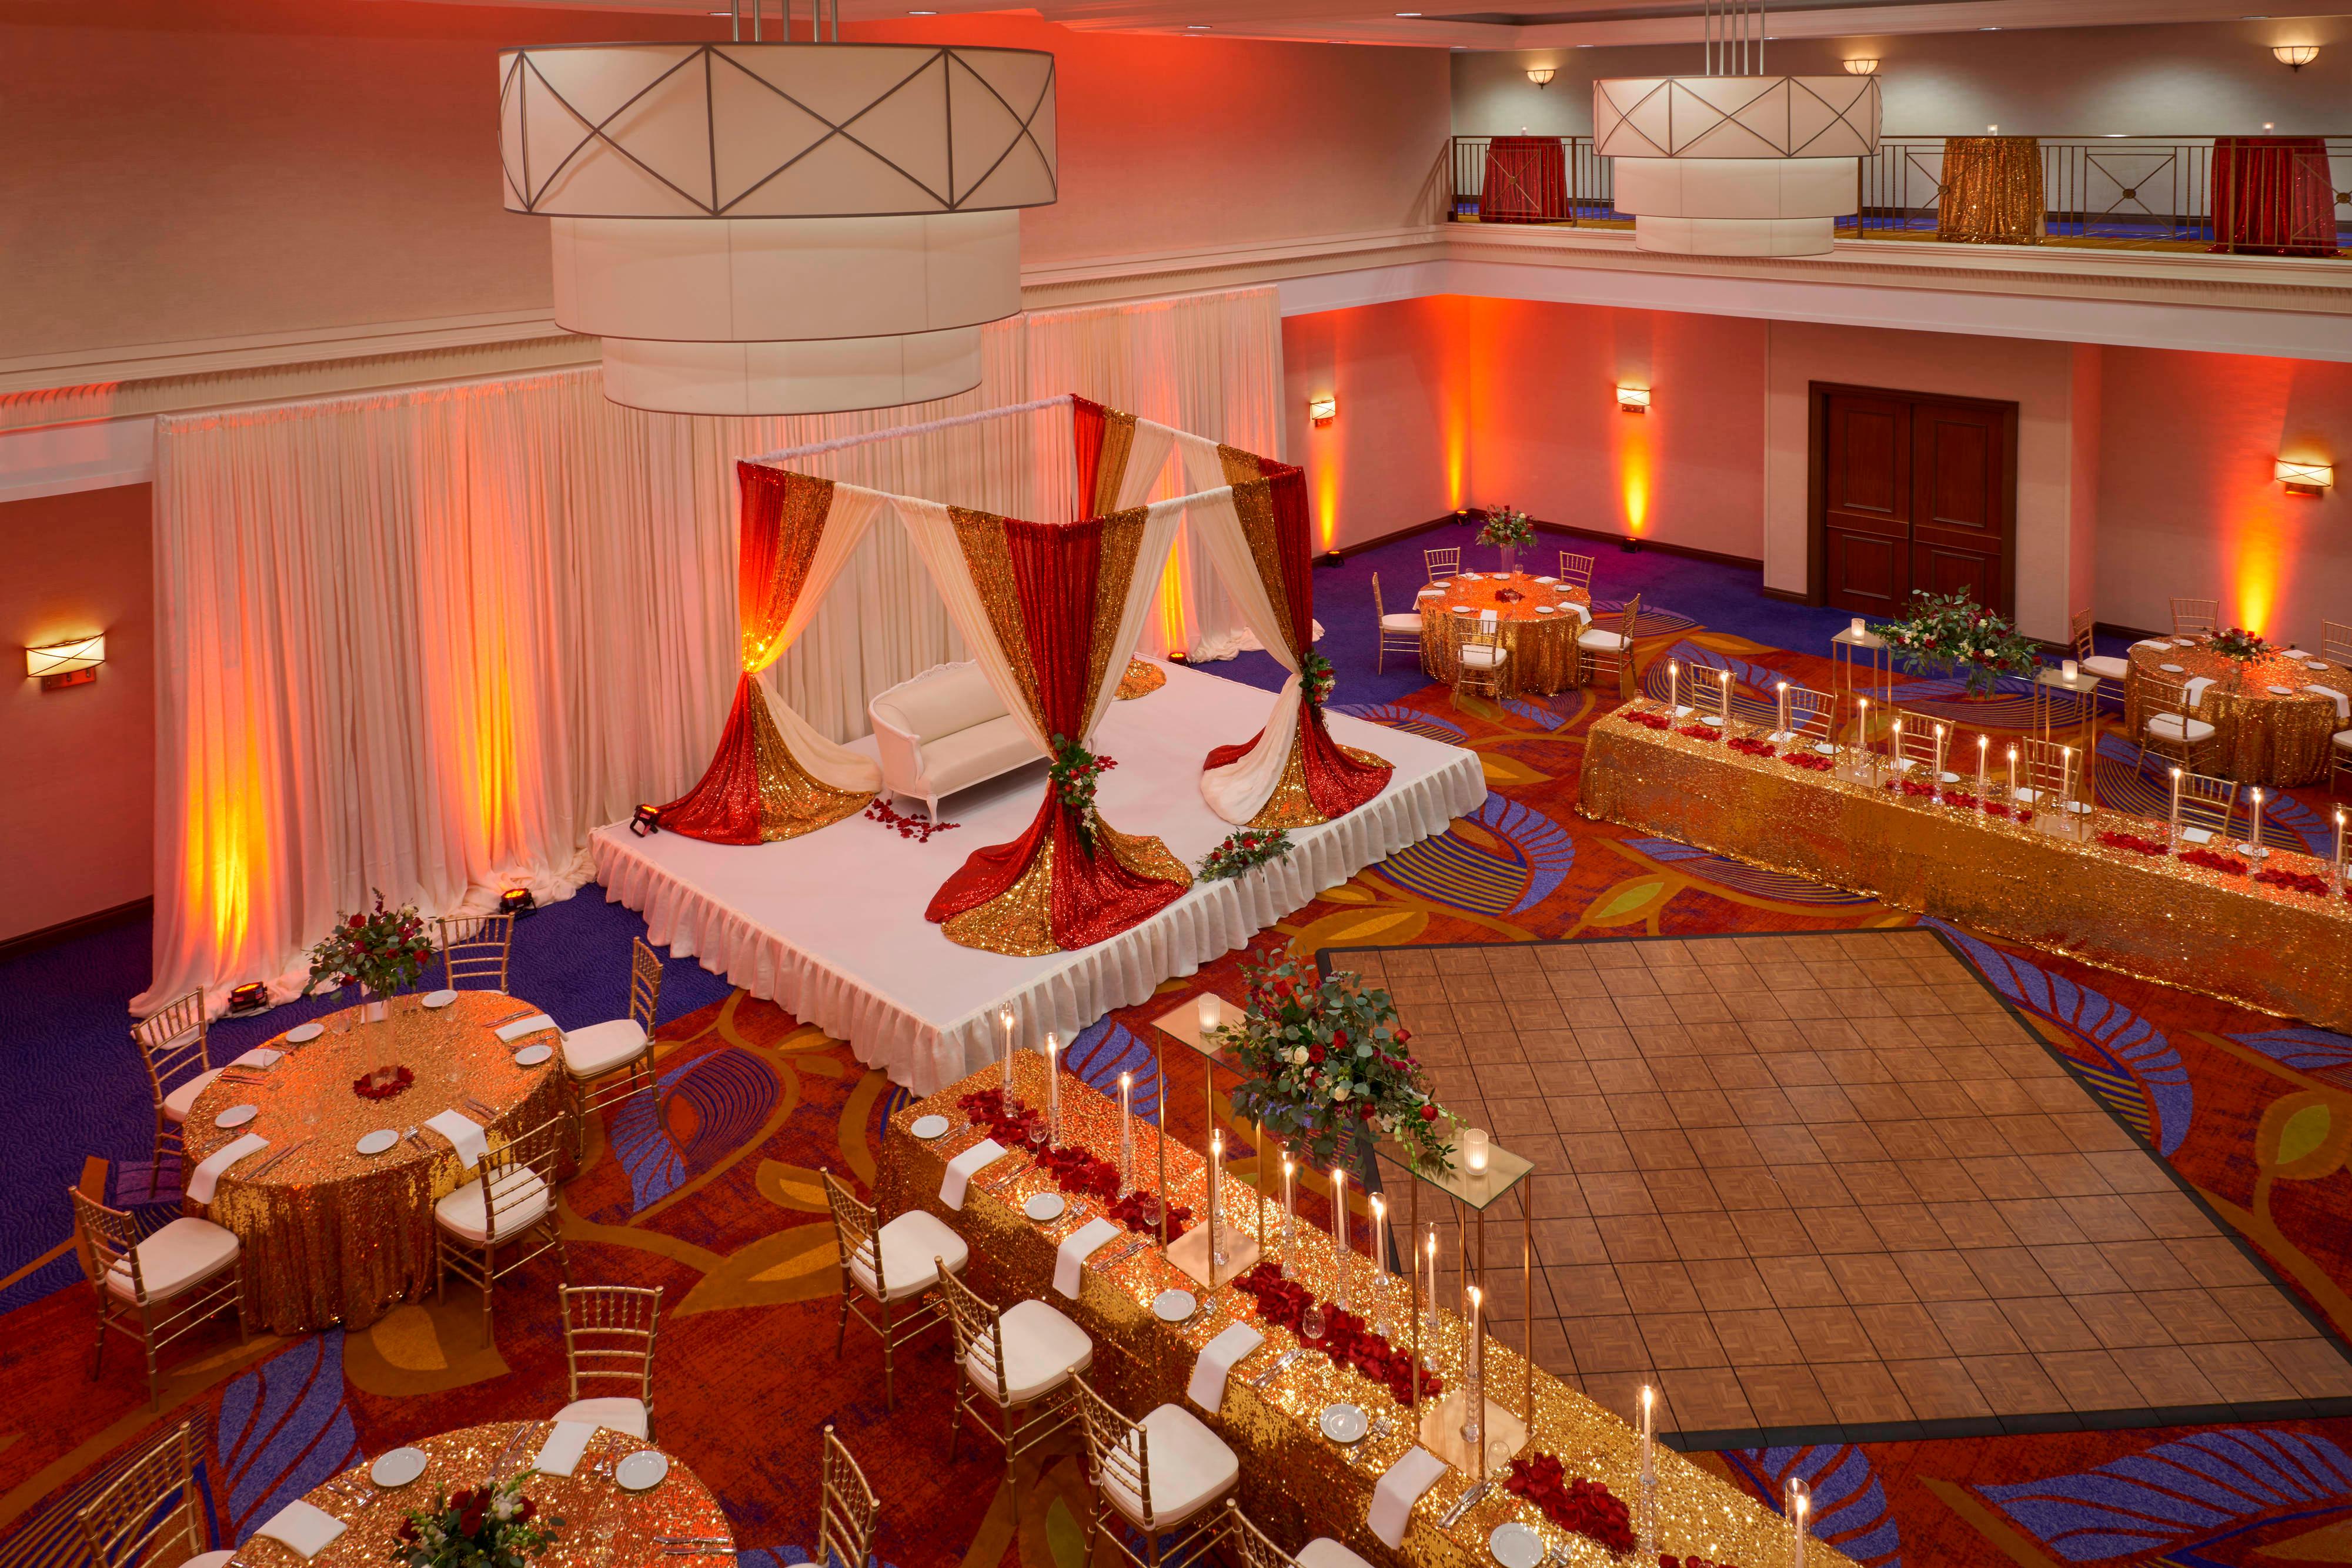 Ballroom decorated in red and gold